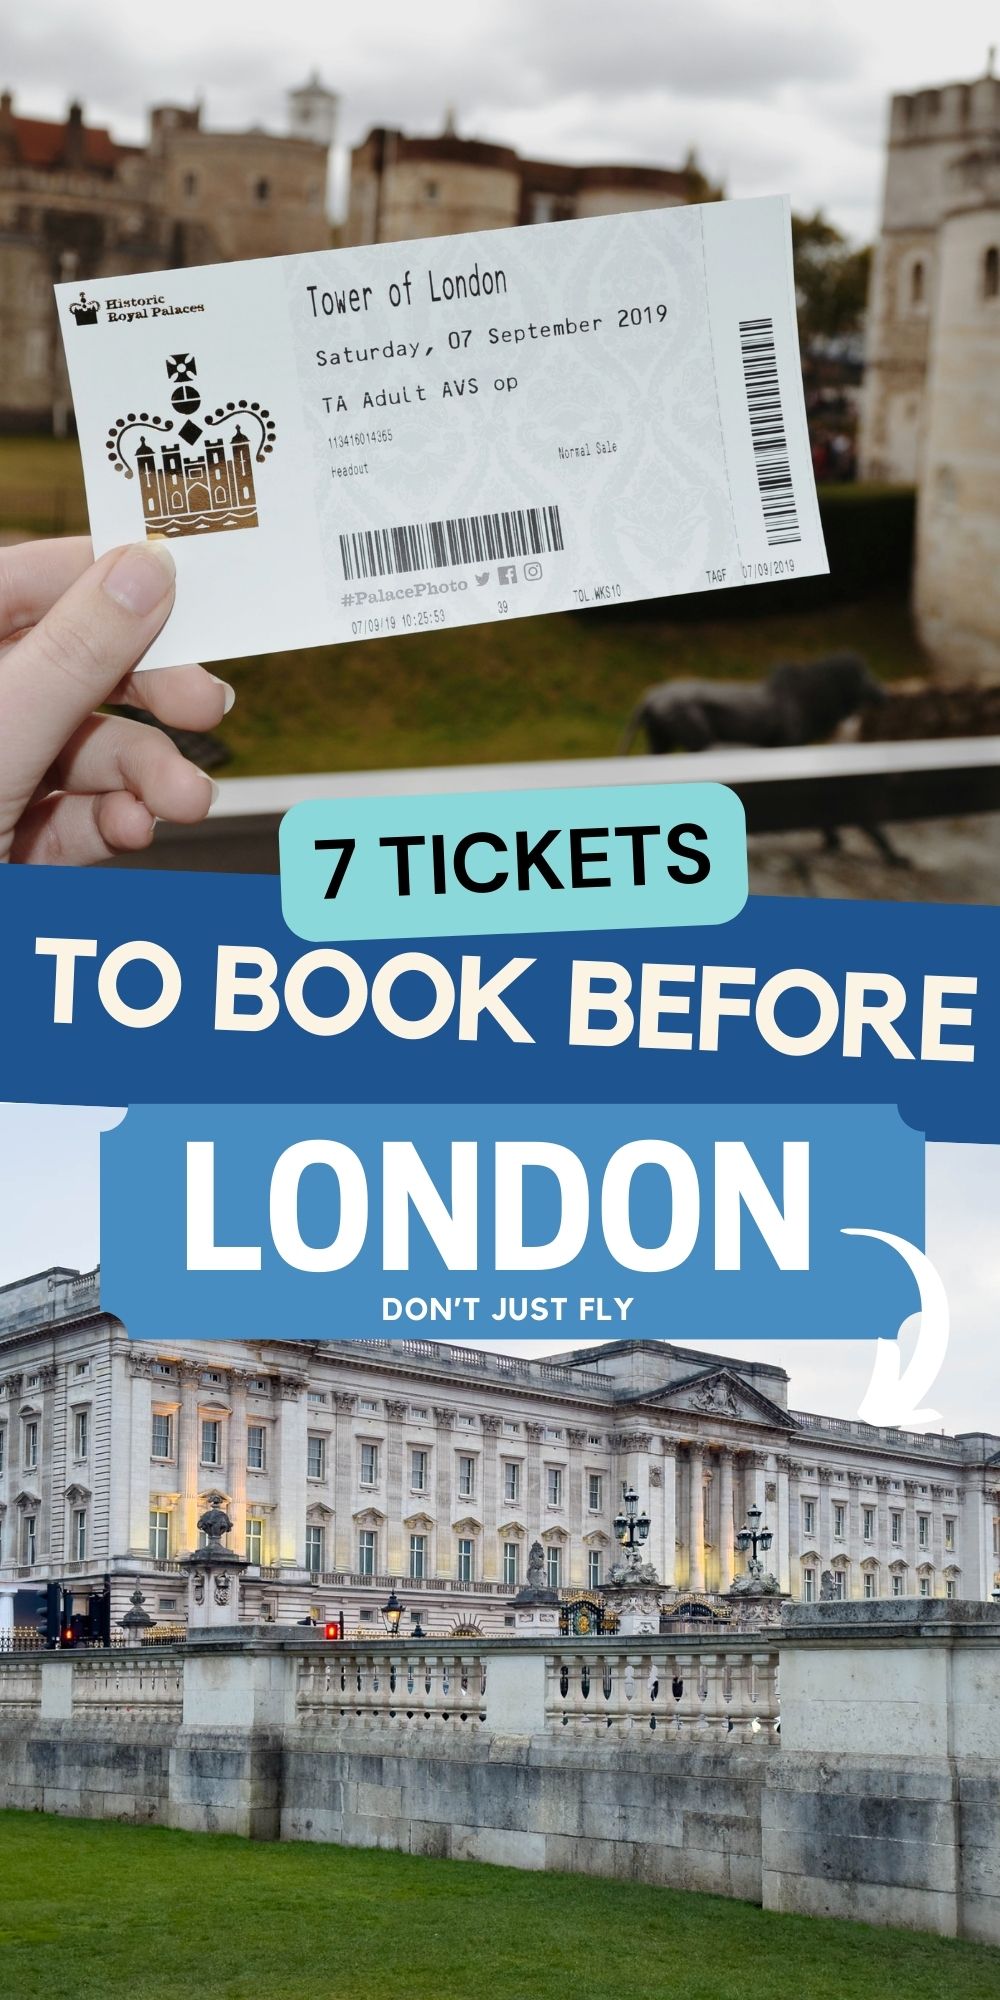 A photo of a paper ticket that gives entry to the Tower of London next to a photo of Buckingham Palace.